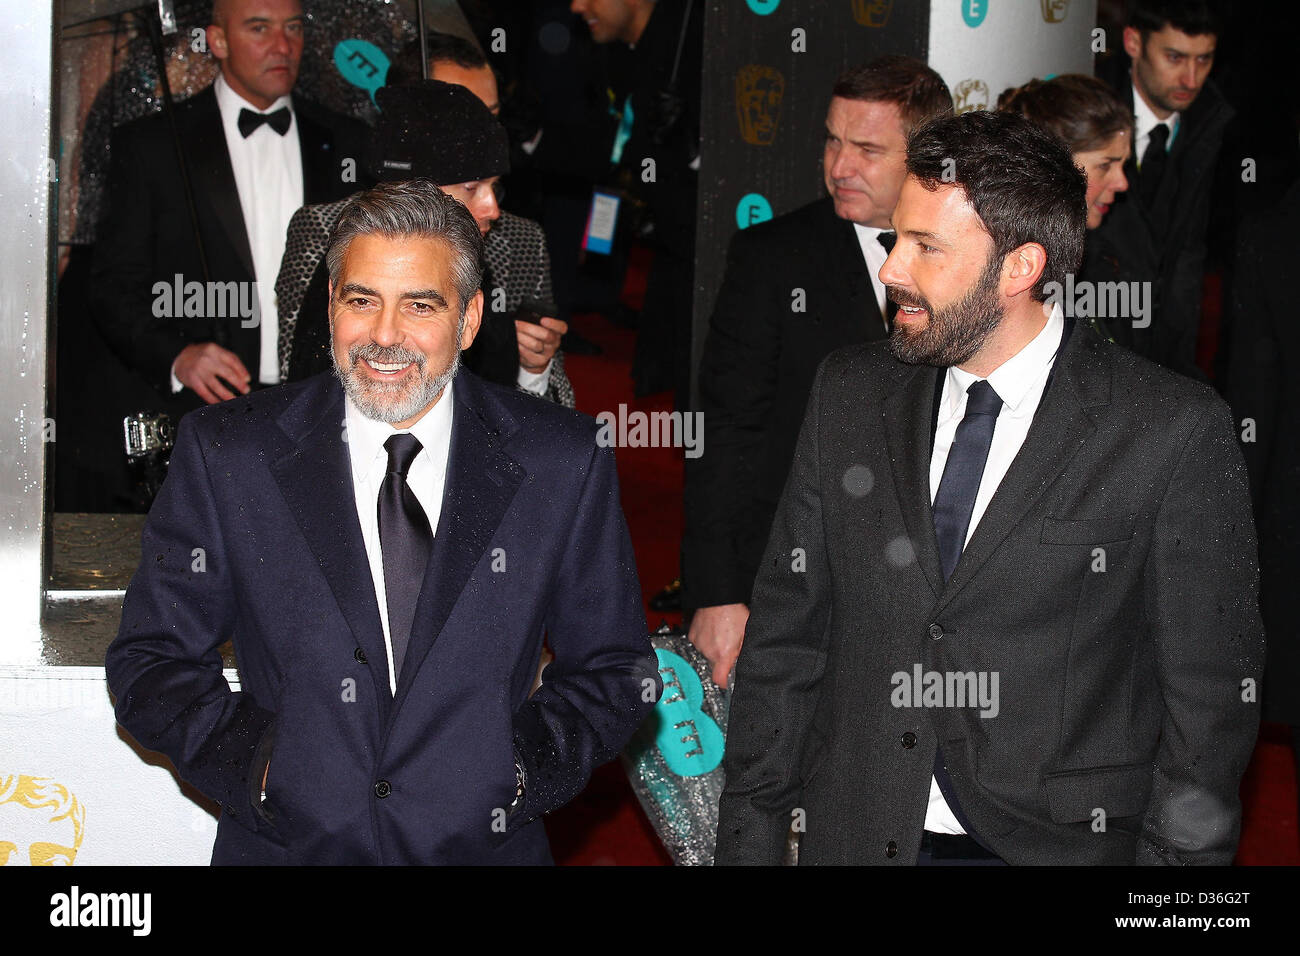 George Clooney & Ben Affleck arrive for the EE British Academy Film Awards - Red Carpet Arrivals at the Royal Opera House. Credi Stock Photo